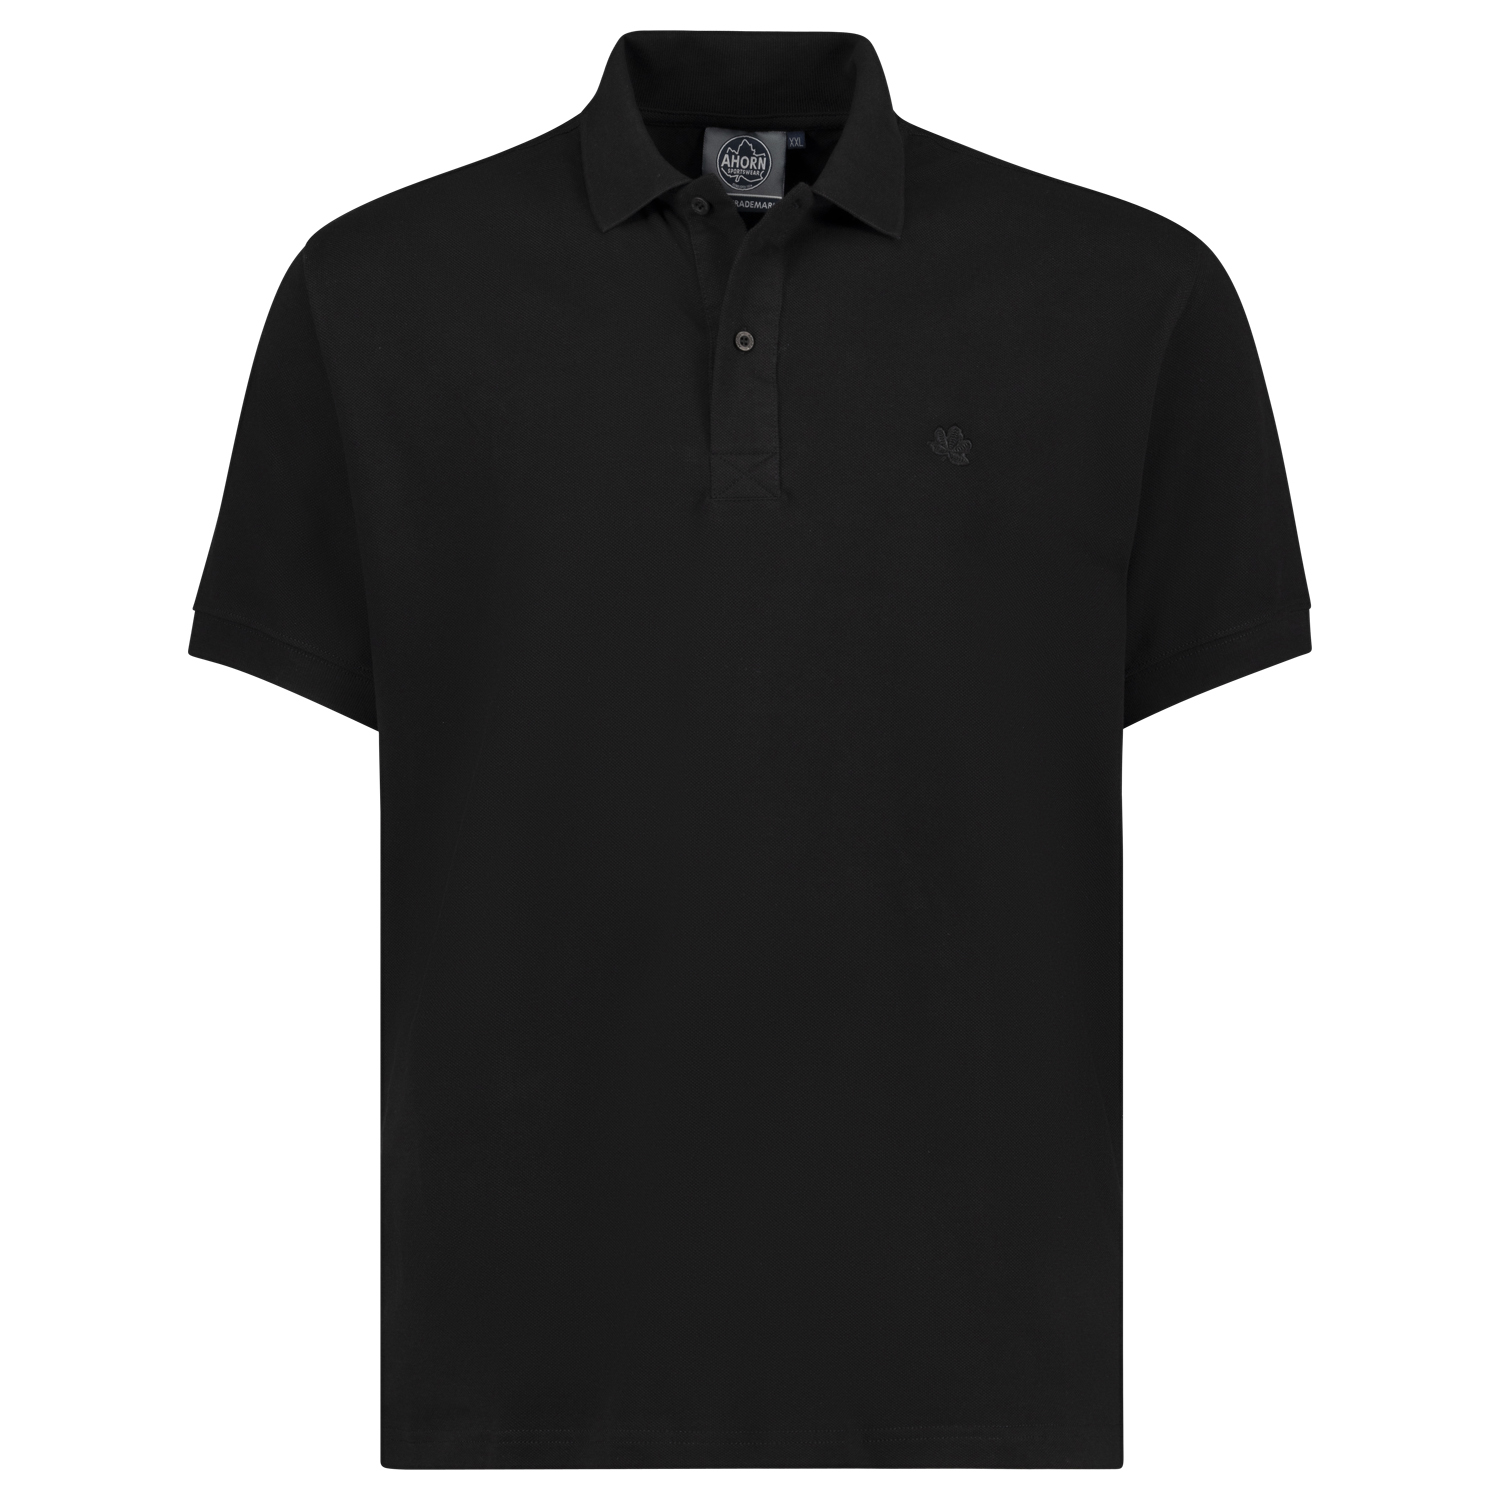 Short sleeve poloshirt for men in black by Ahorn Sportswear up to oversize 10XL